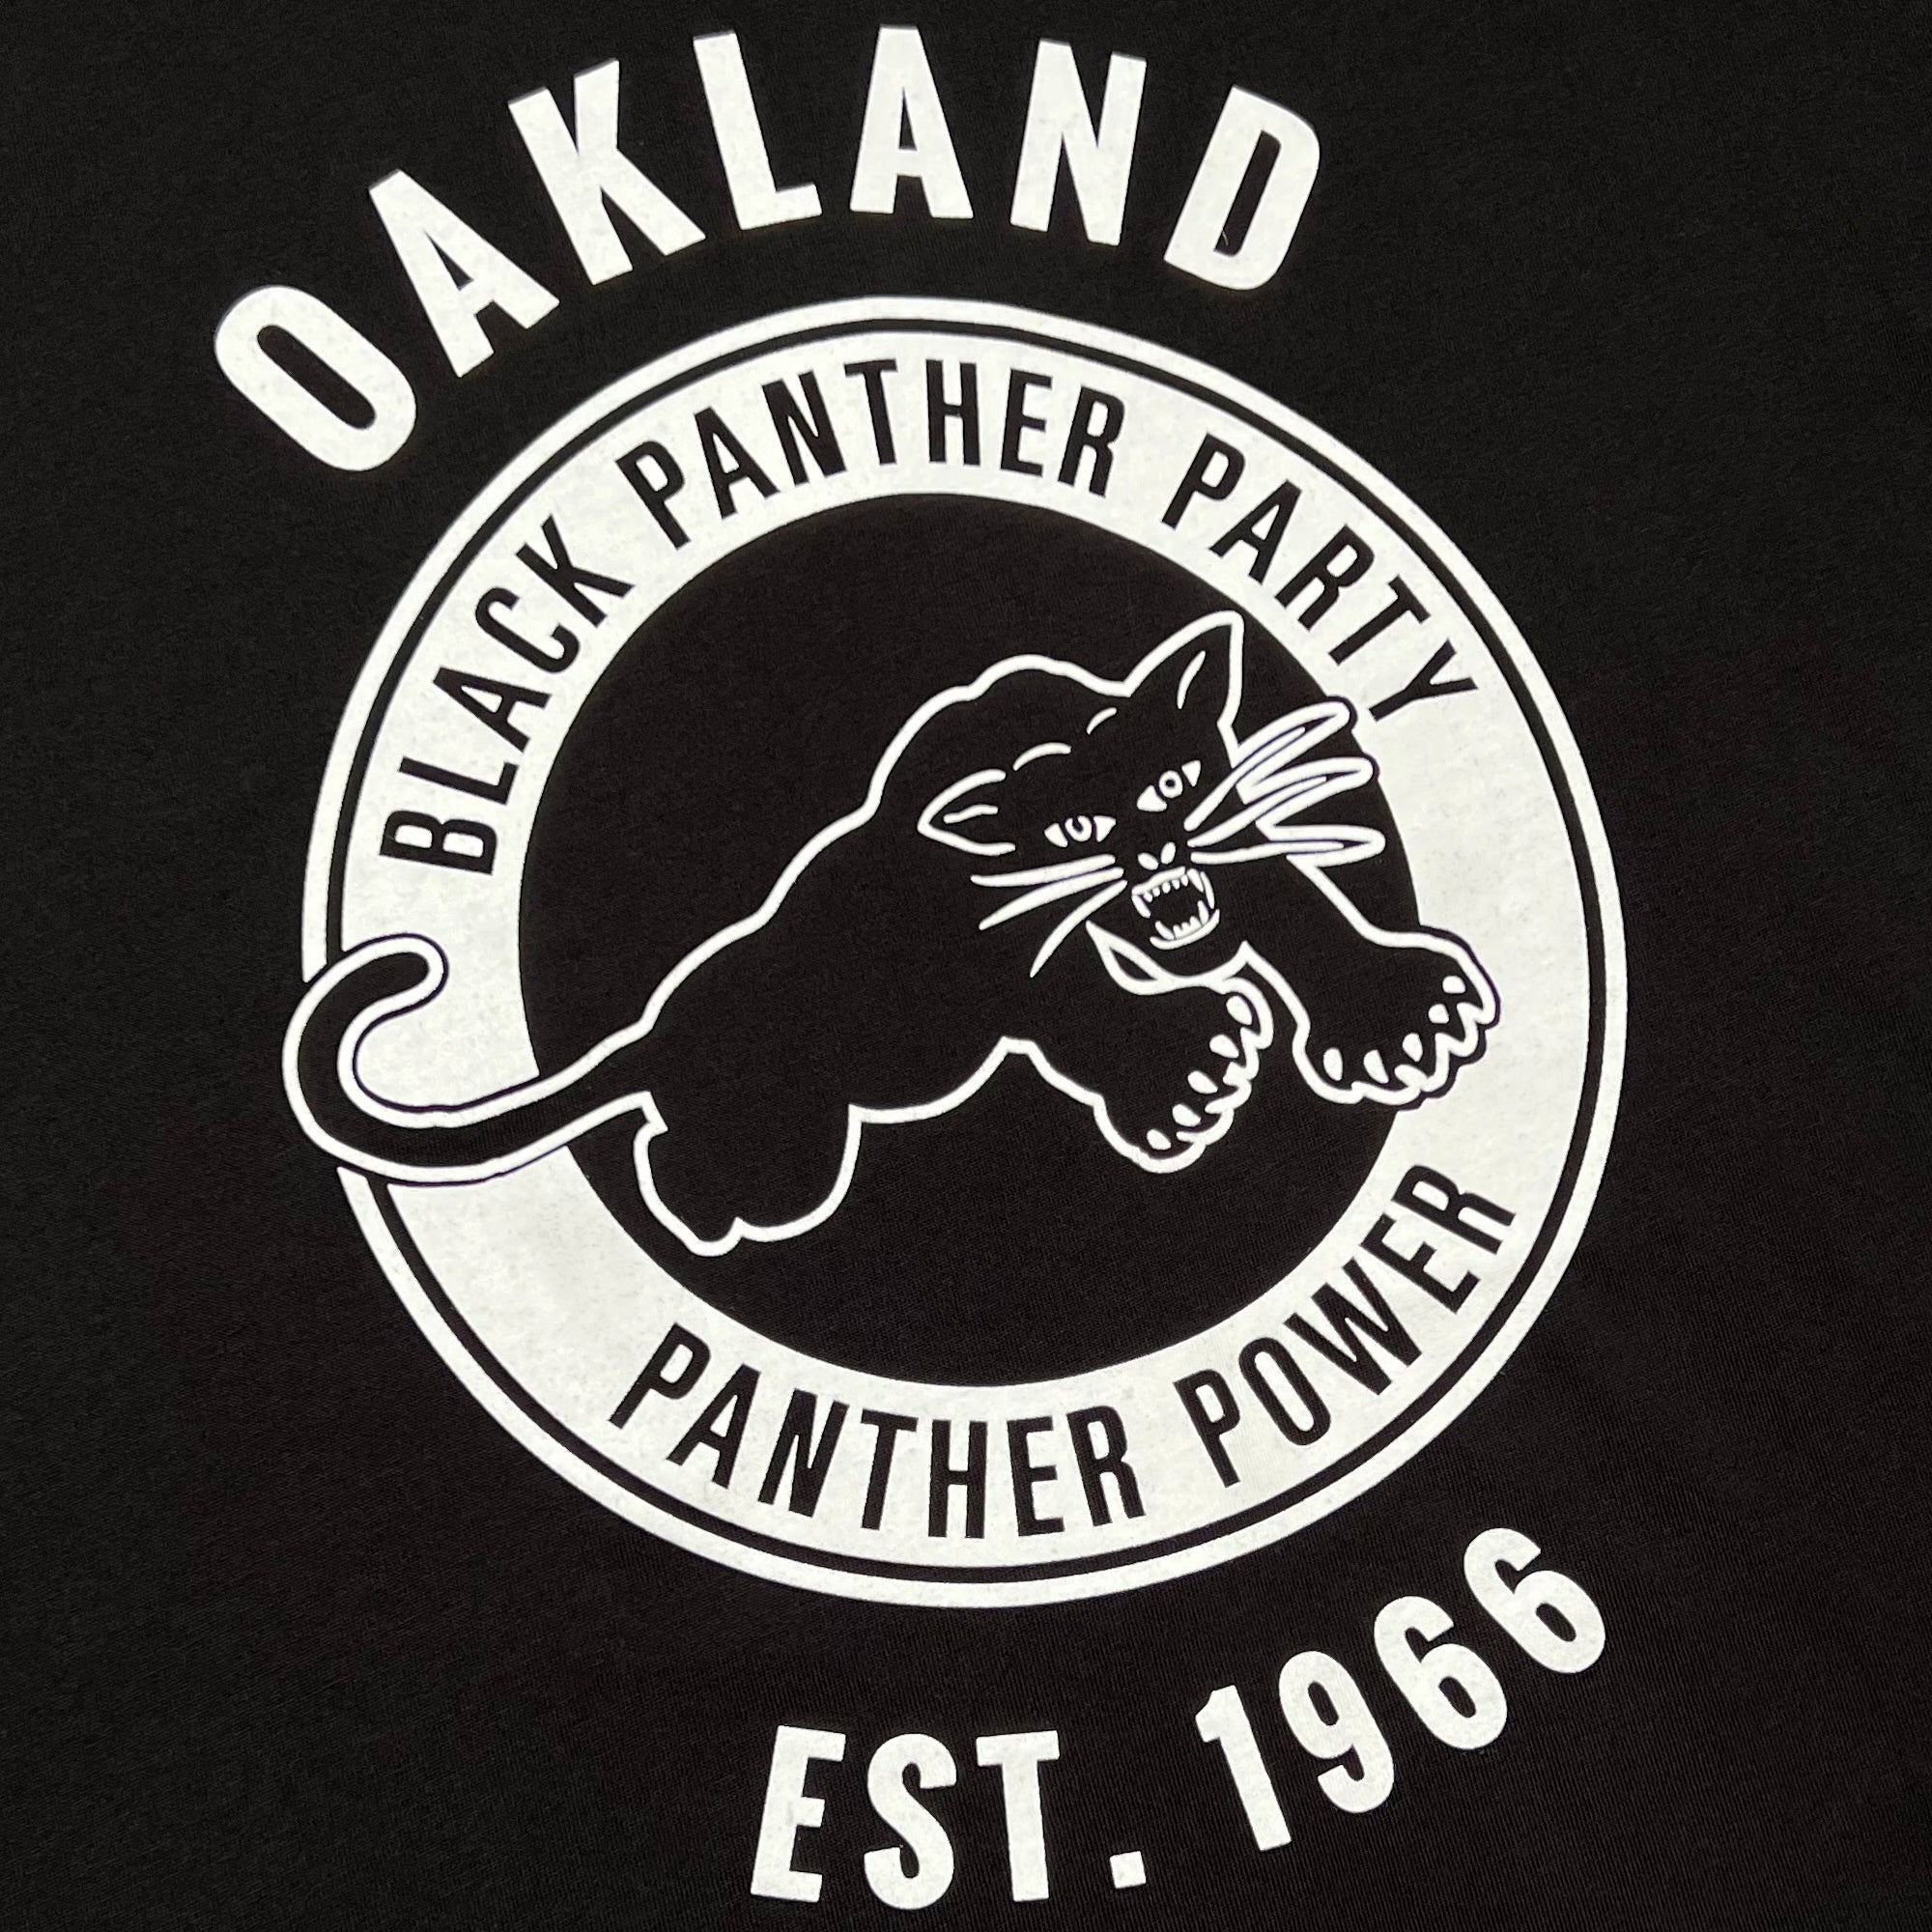 Detailed close up image of men's black t-shirt with Black Panther Party Alumni Legacy Network logo.